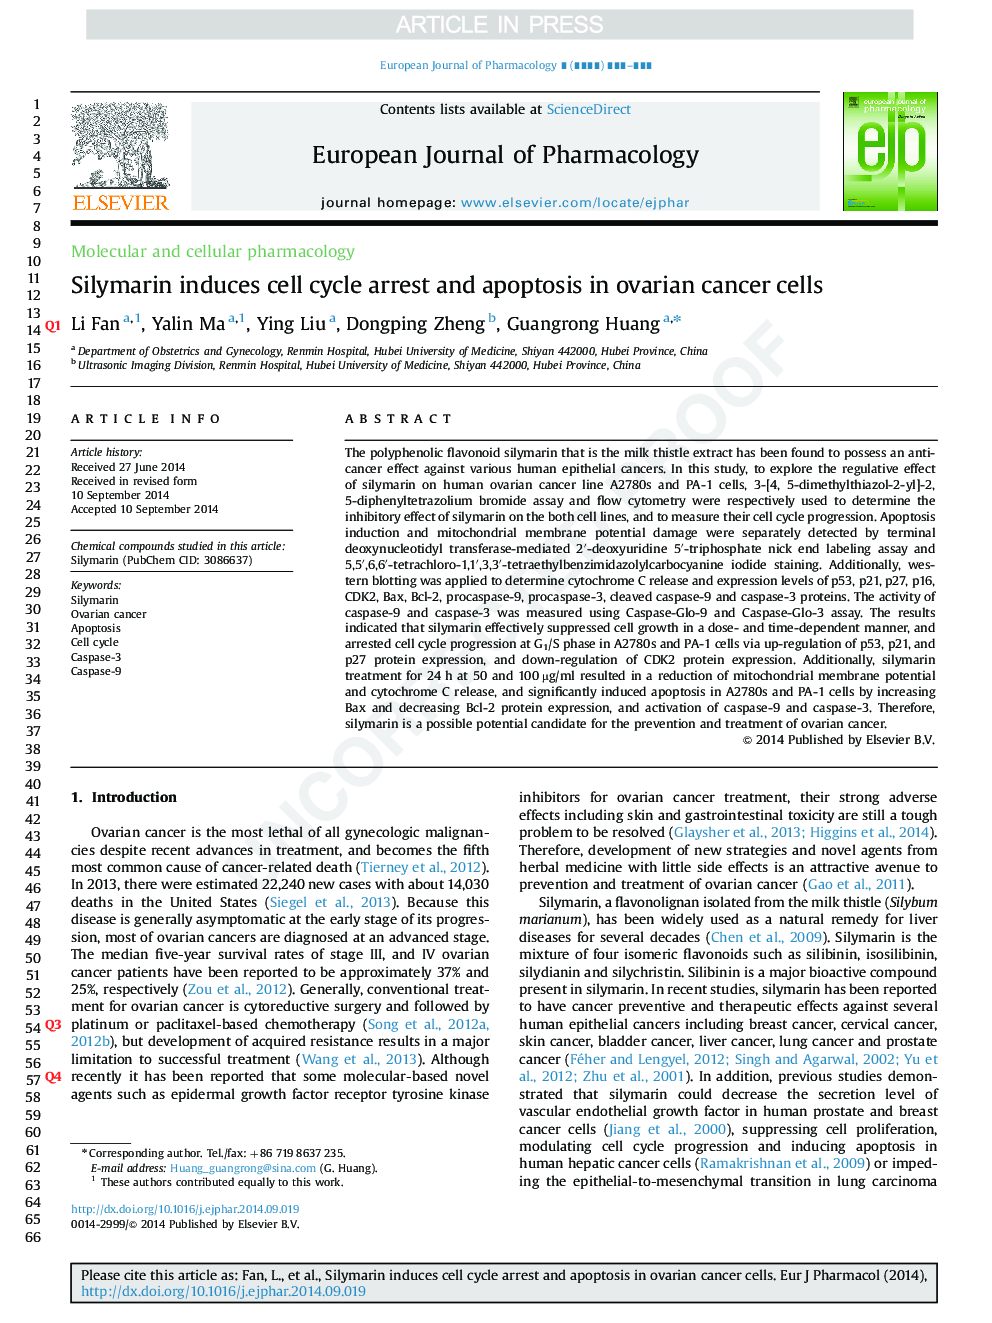 Silymarin induces cell cycle arrest and apoptosis in ovarian cancer cells